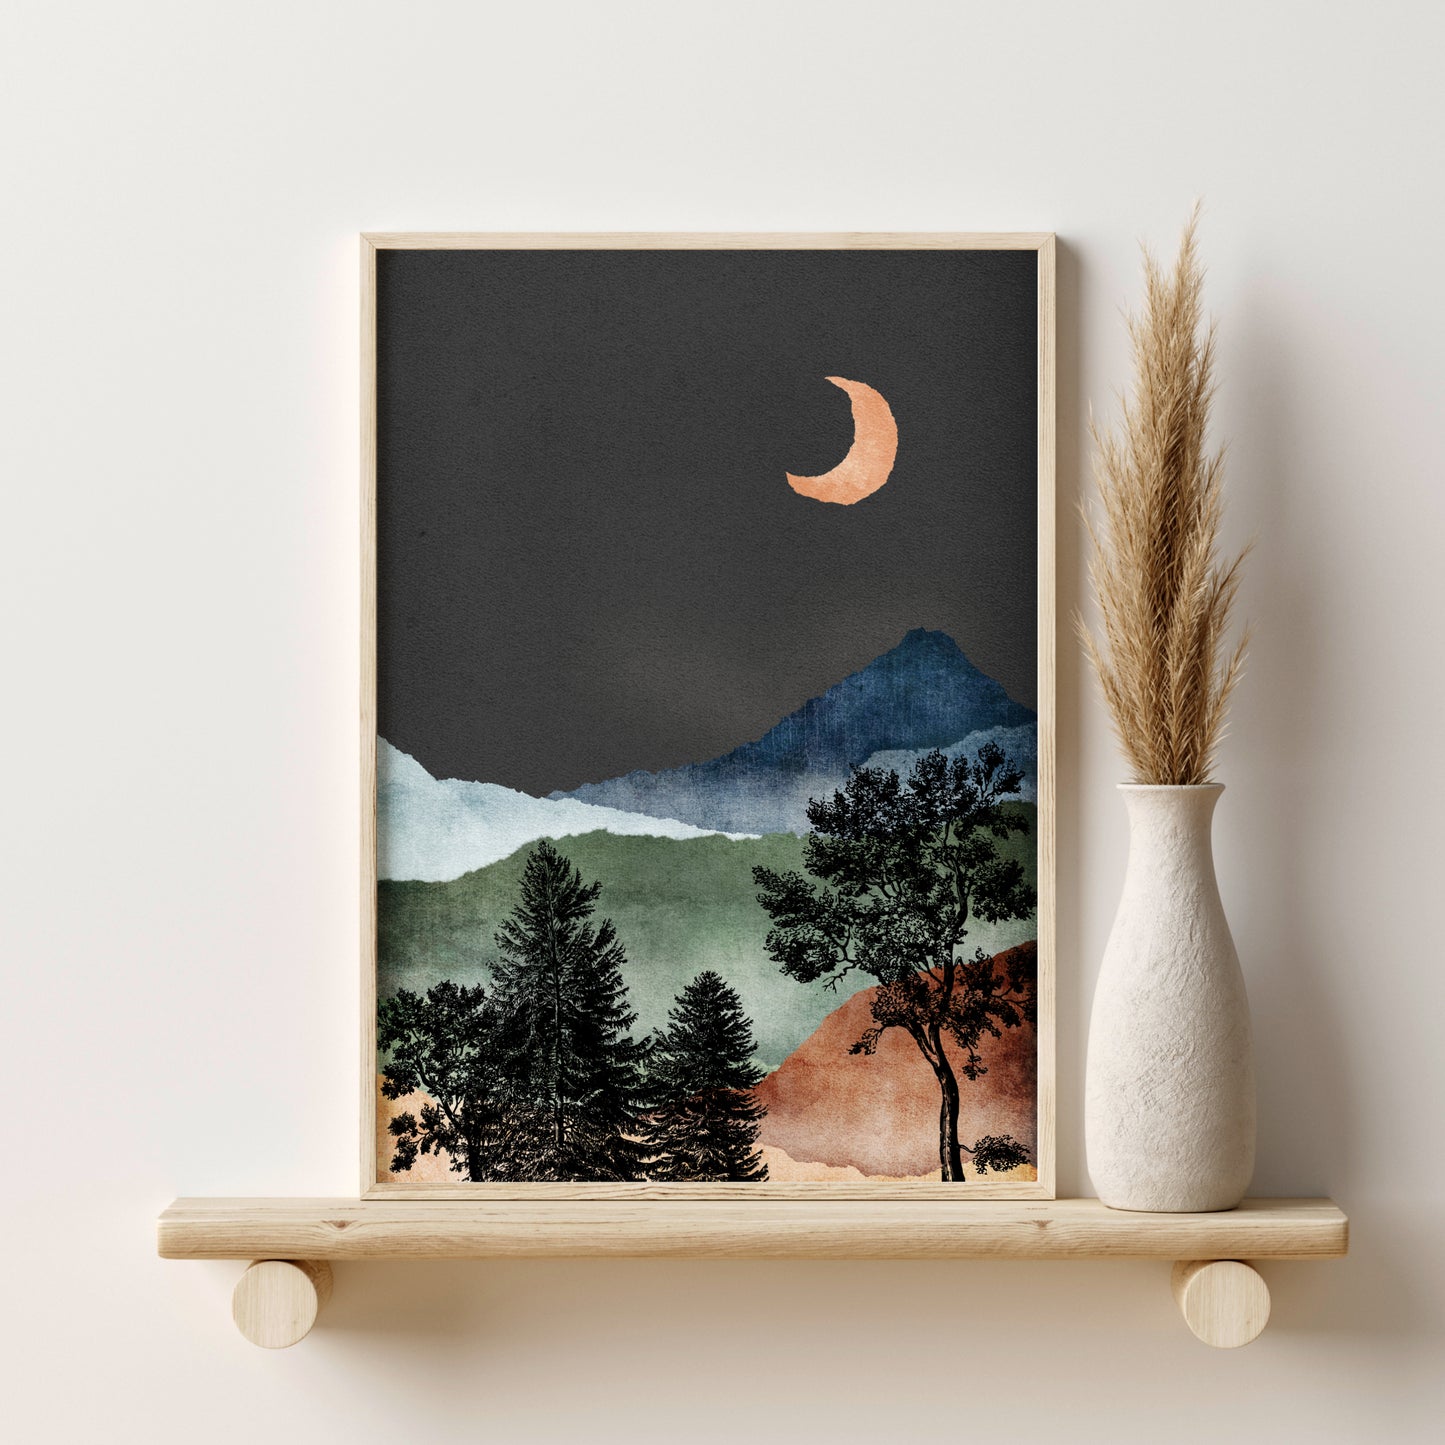 Printed Sun and Moon Landscape Wall Art Set of 4 Prints